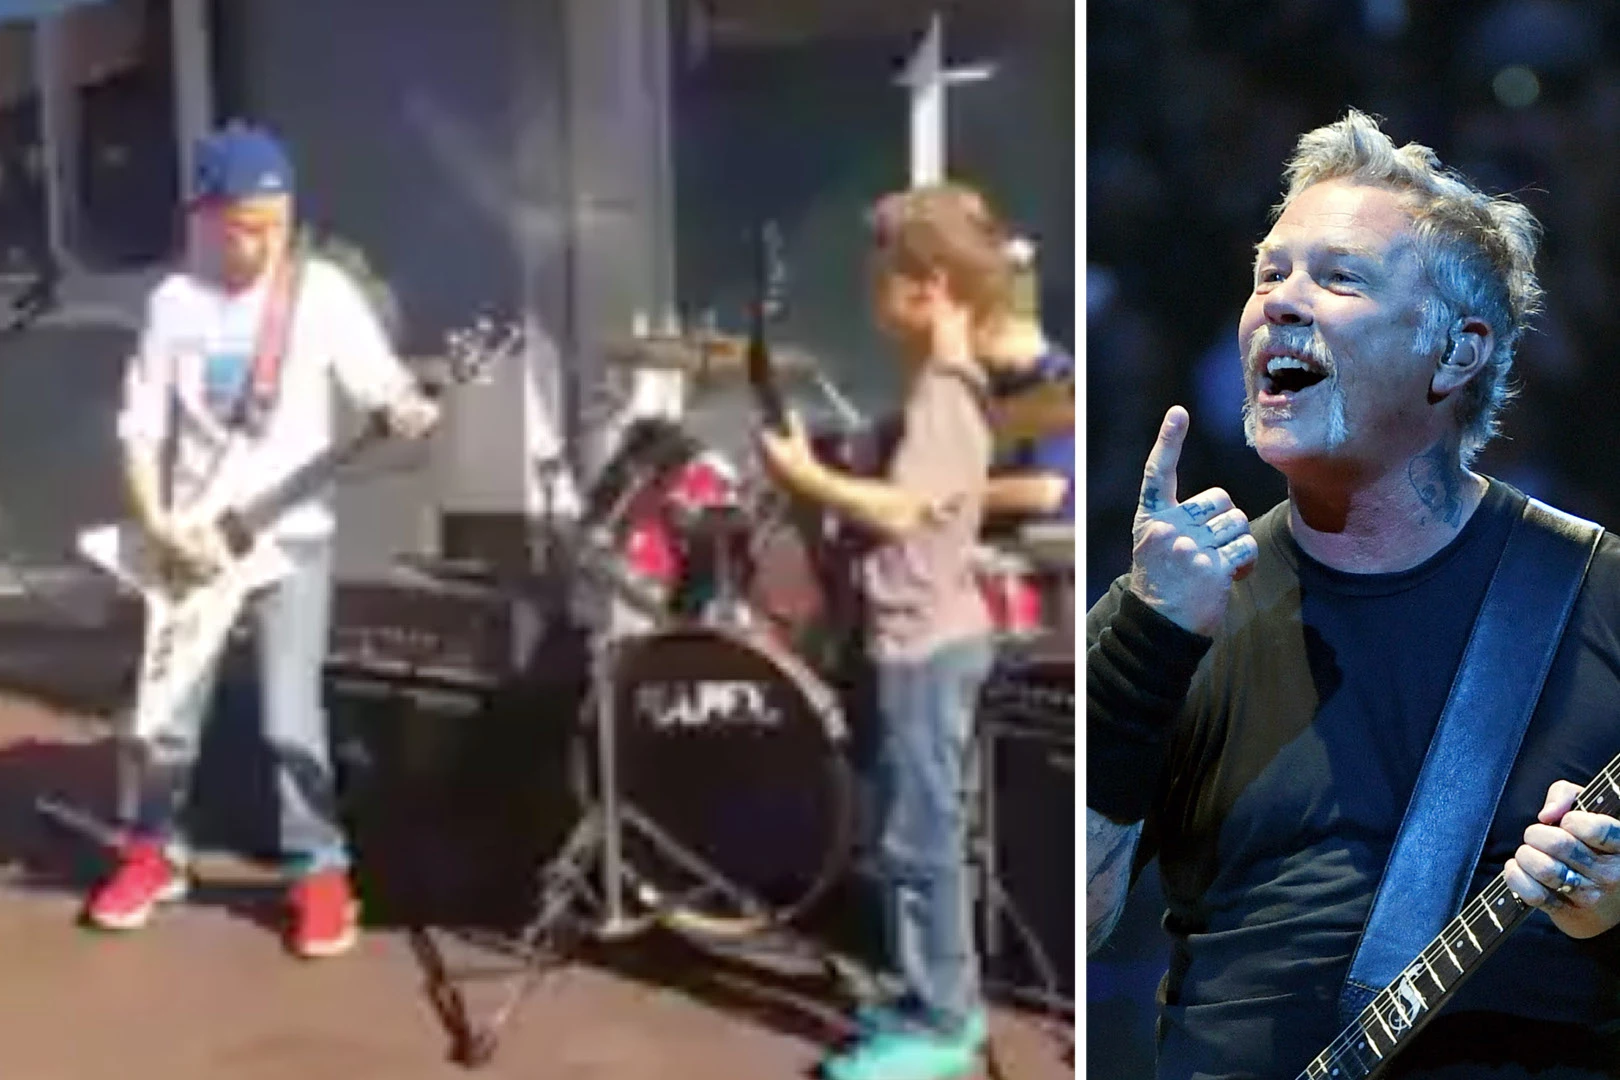 Kid Band Plays Metallica's 'Eye of the Beholder' on the Street